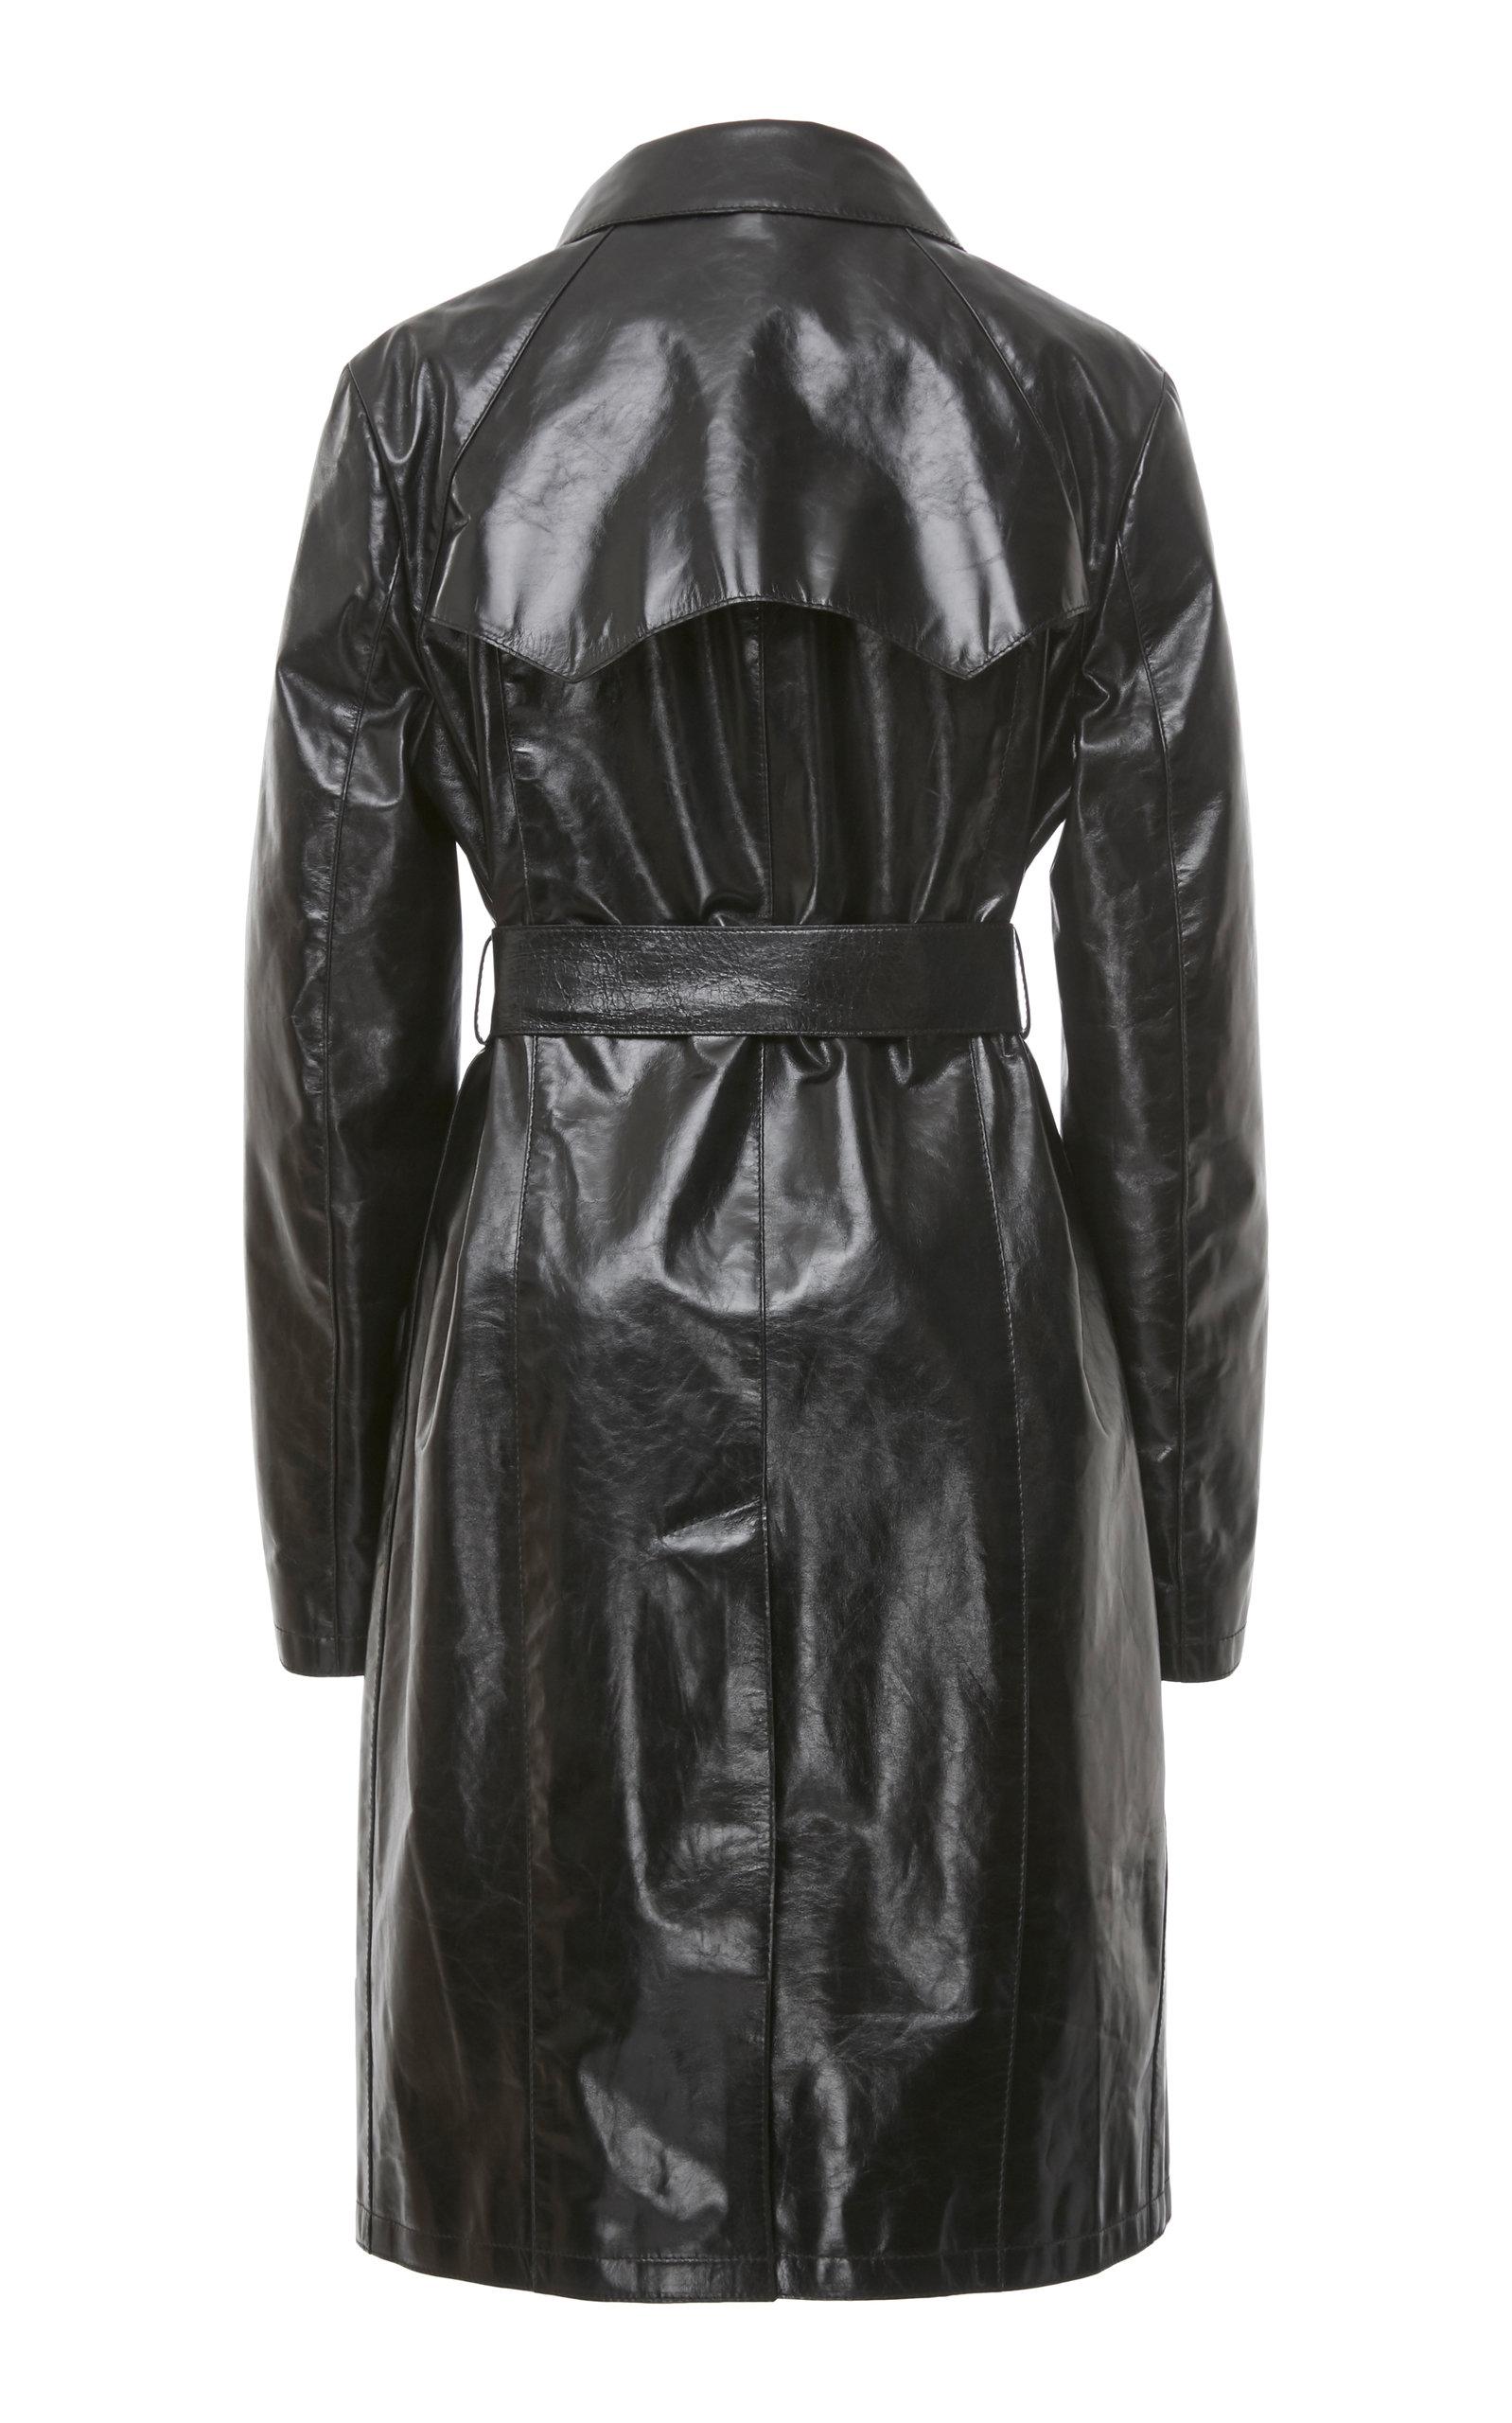 Maison Margiela Belted Leather Trench Coat in Black - Lyst